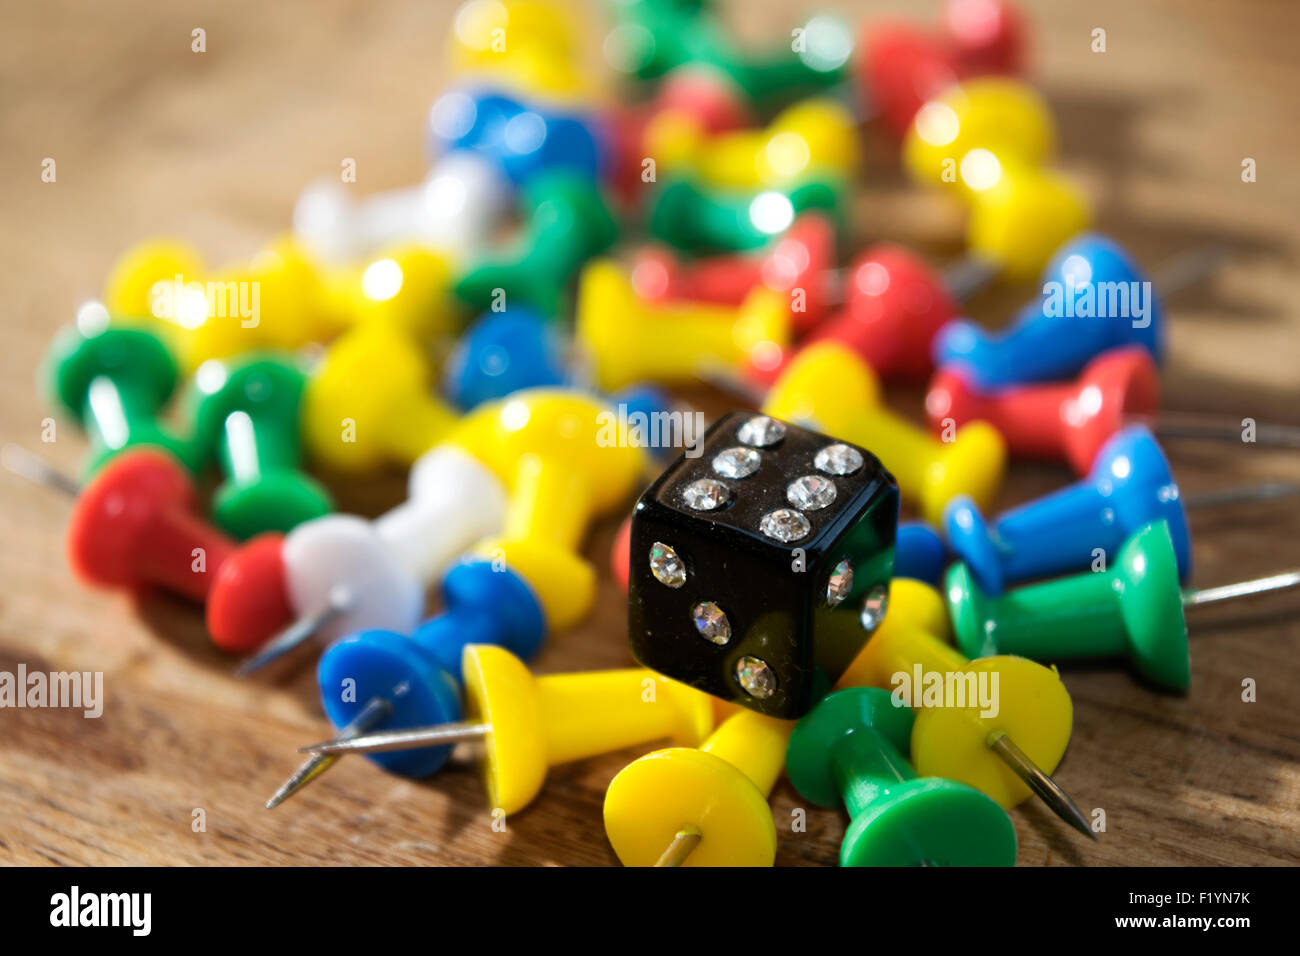 objects : die and colored pushpins on a table Stock Photo